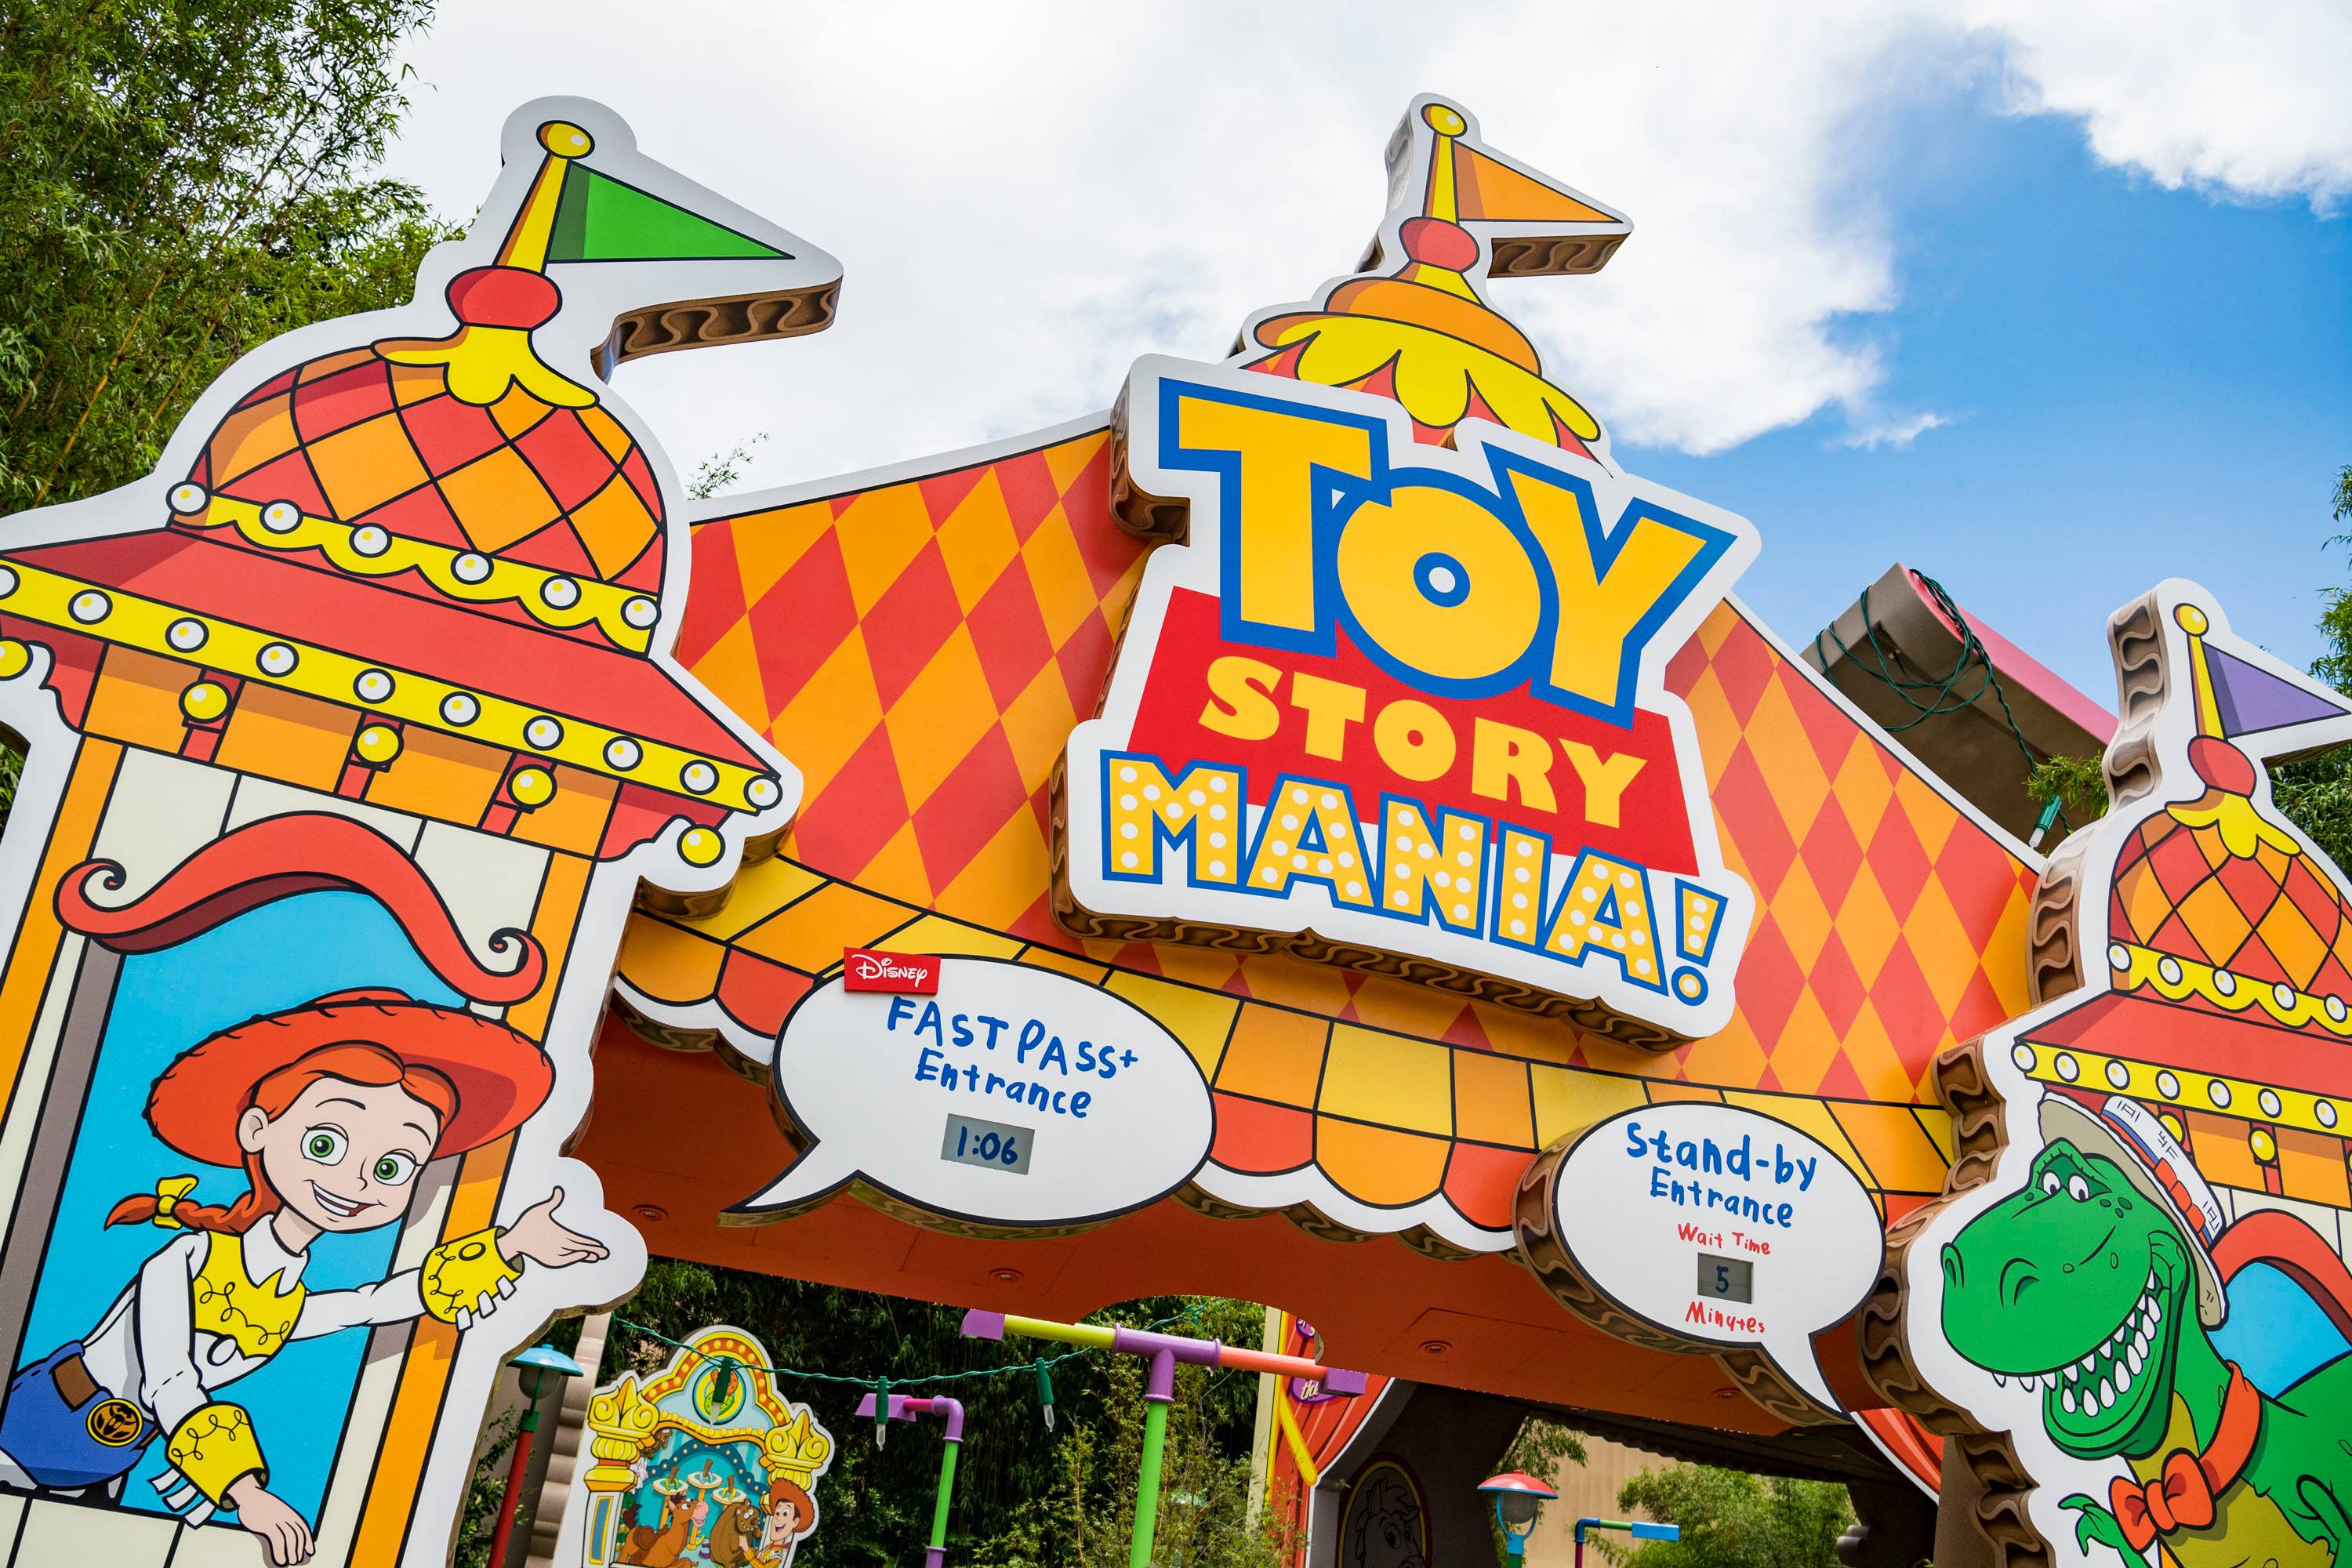 The new entrance to Toy Story Mania from inside Toy Story Land